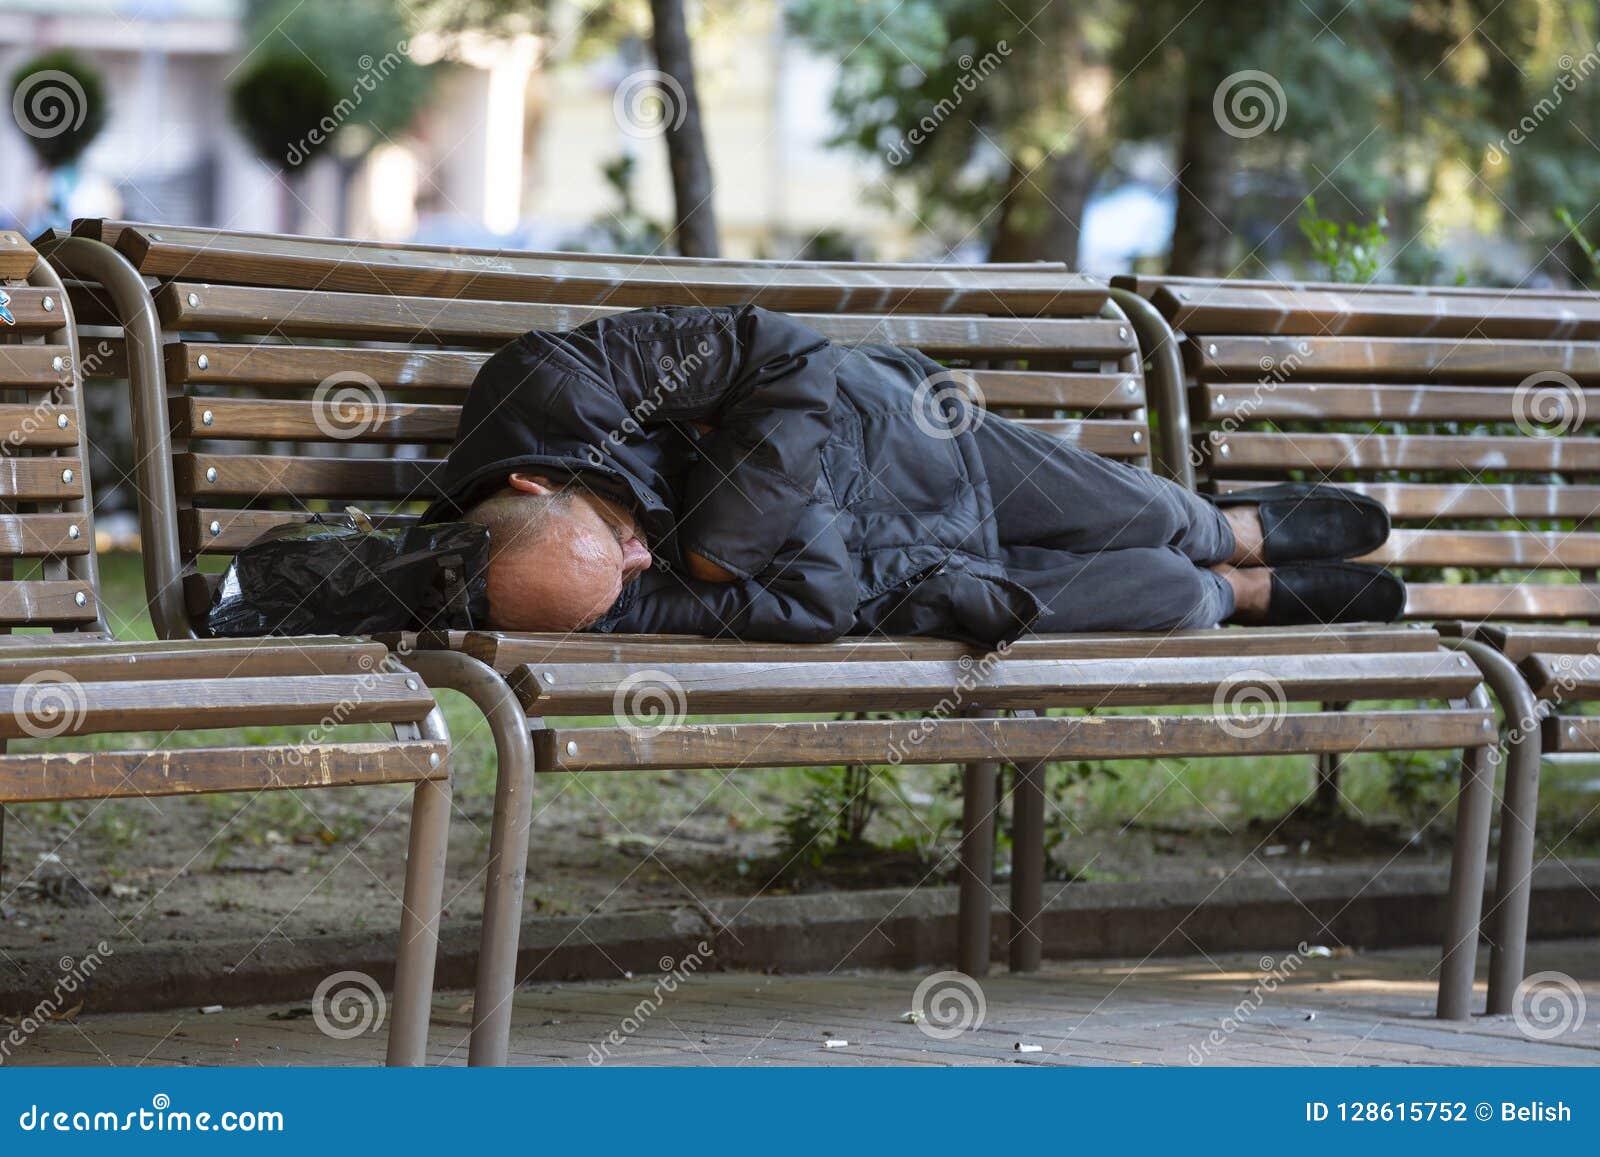 Homeless Man Sleeping On A Bench Editorial Photography Image Of Black Misery